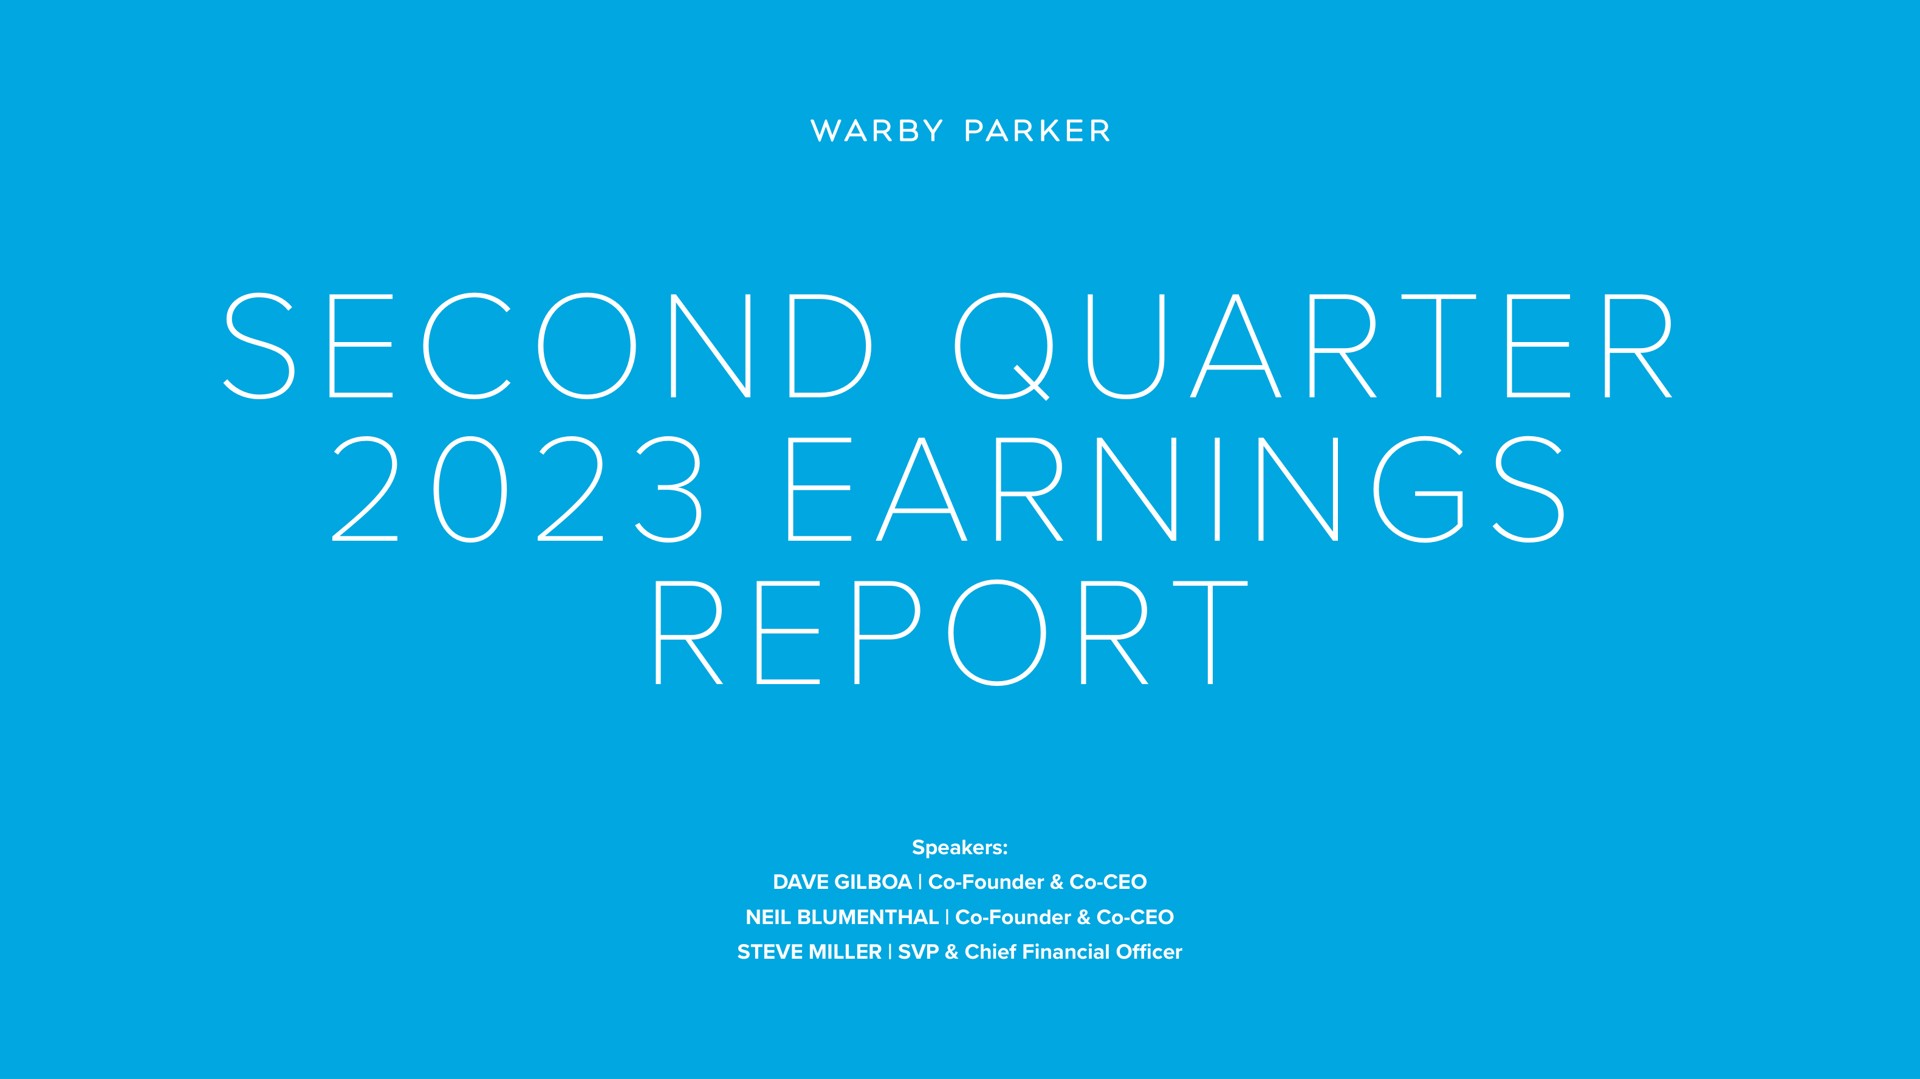 second quarter earnings report parker iao pac at nat i | Warby Parker